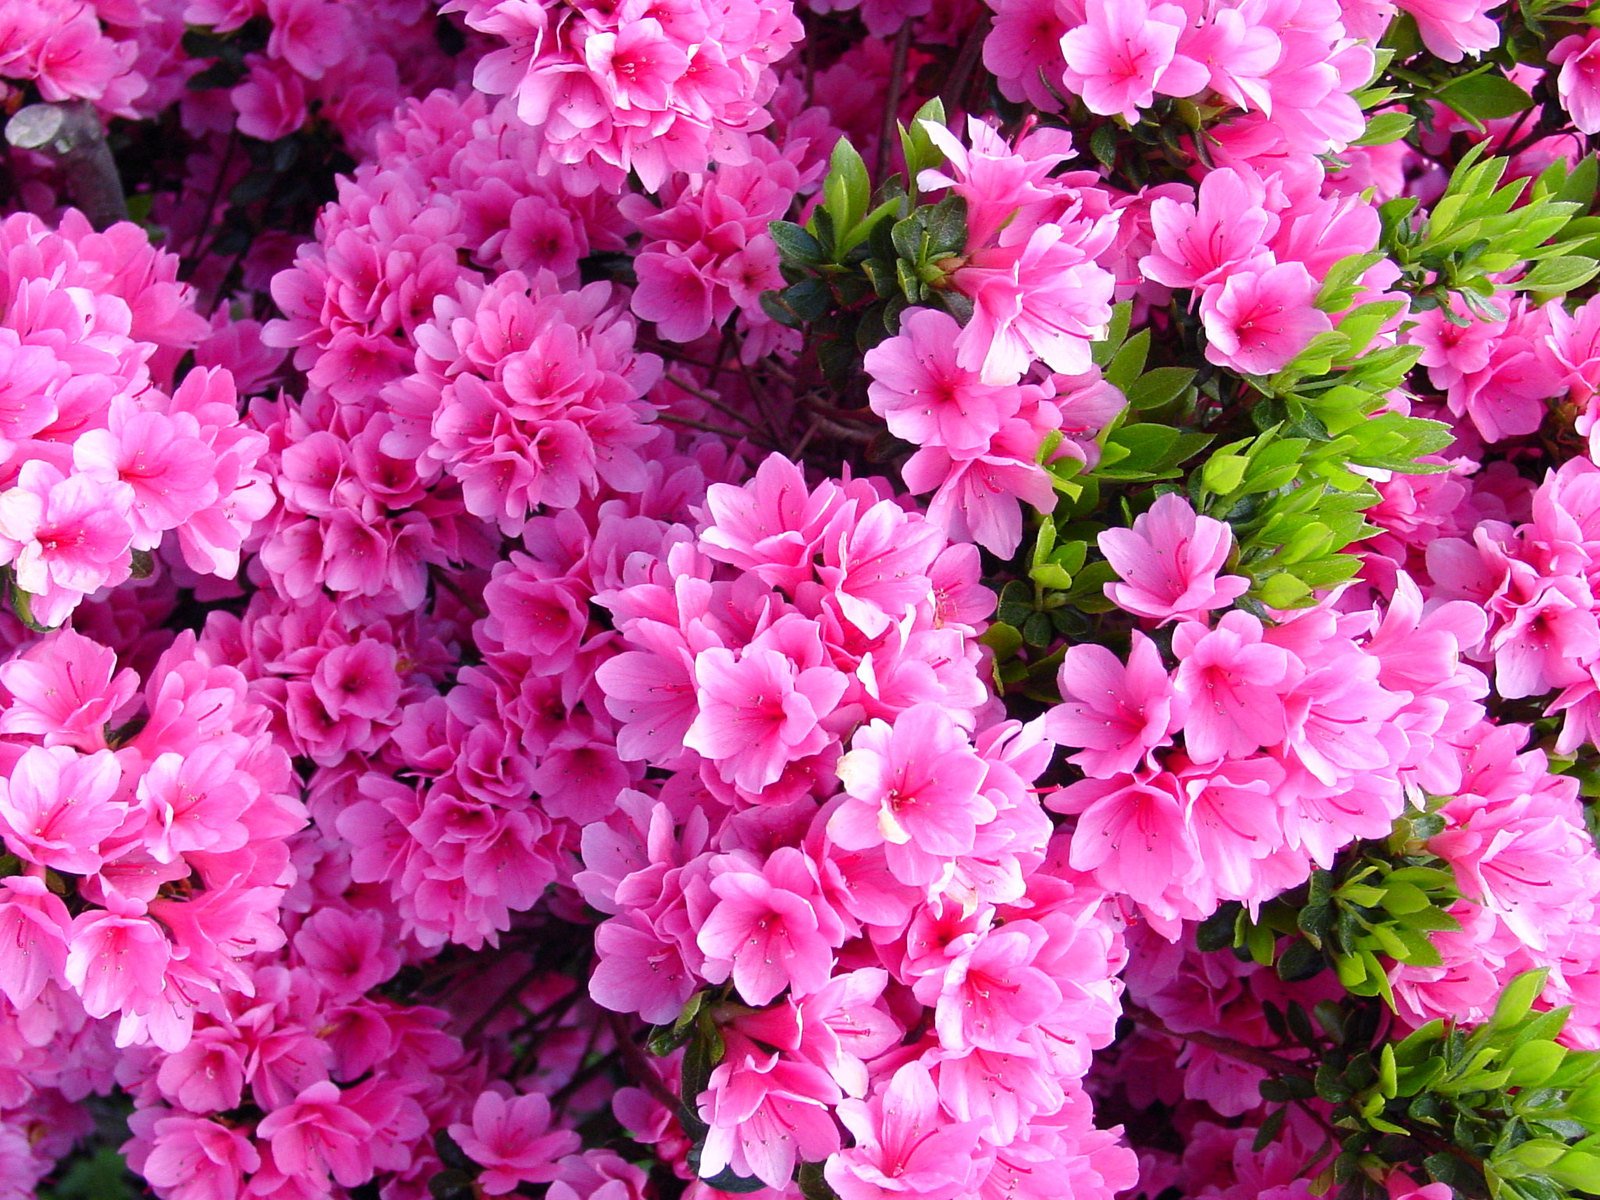 pink flowers and green leaves in close up